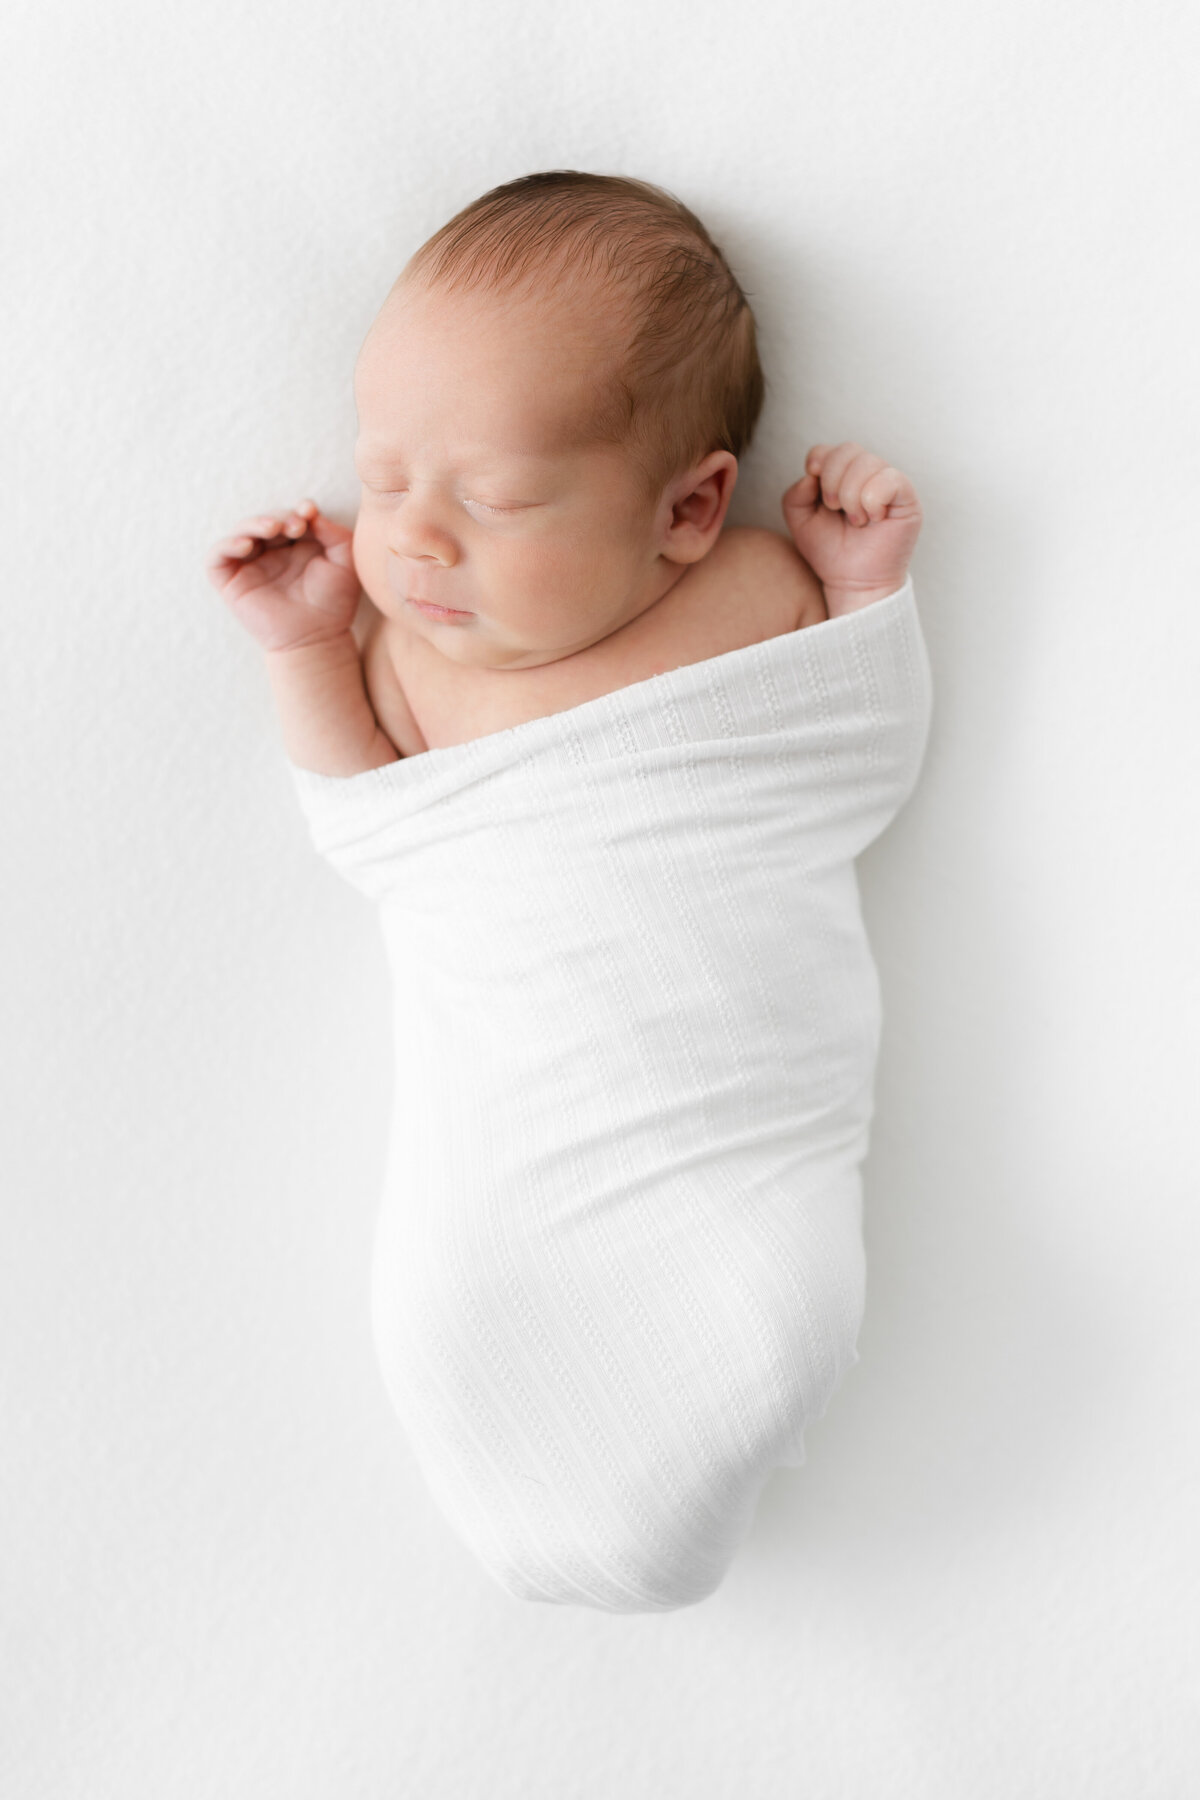 A baby boy swaddled with his arms out in a white blanket at a Northern Virginia Newborn Photography session